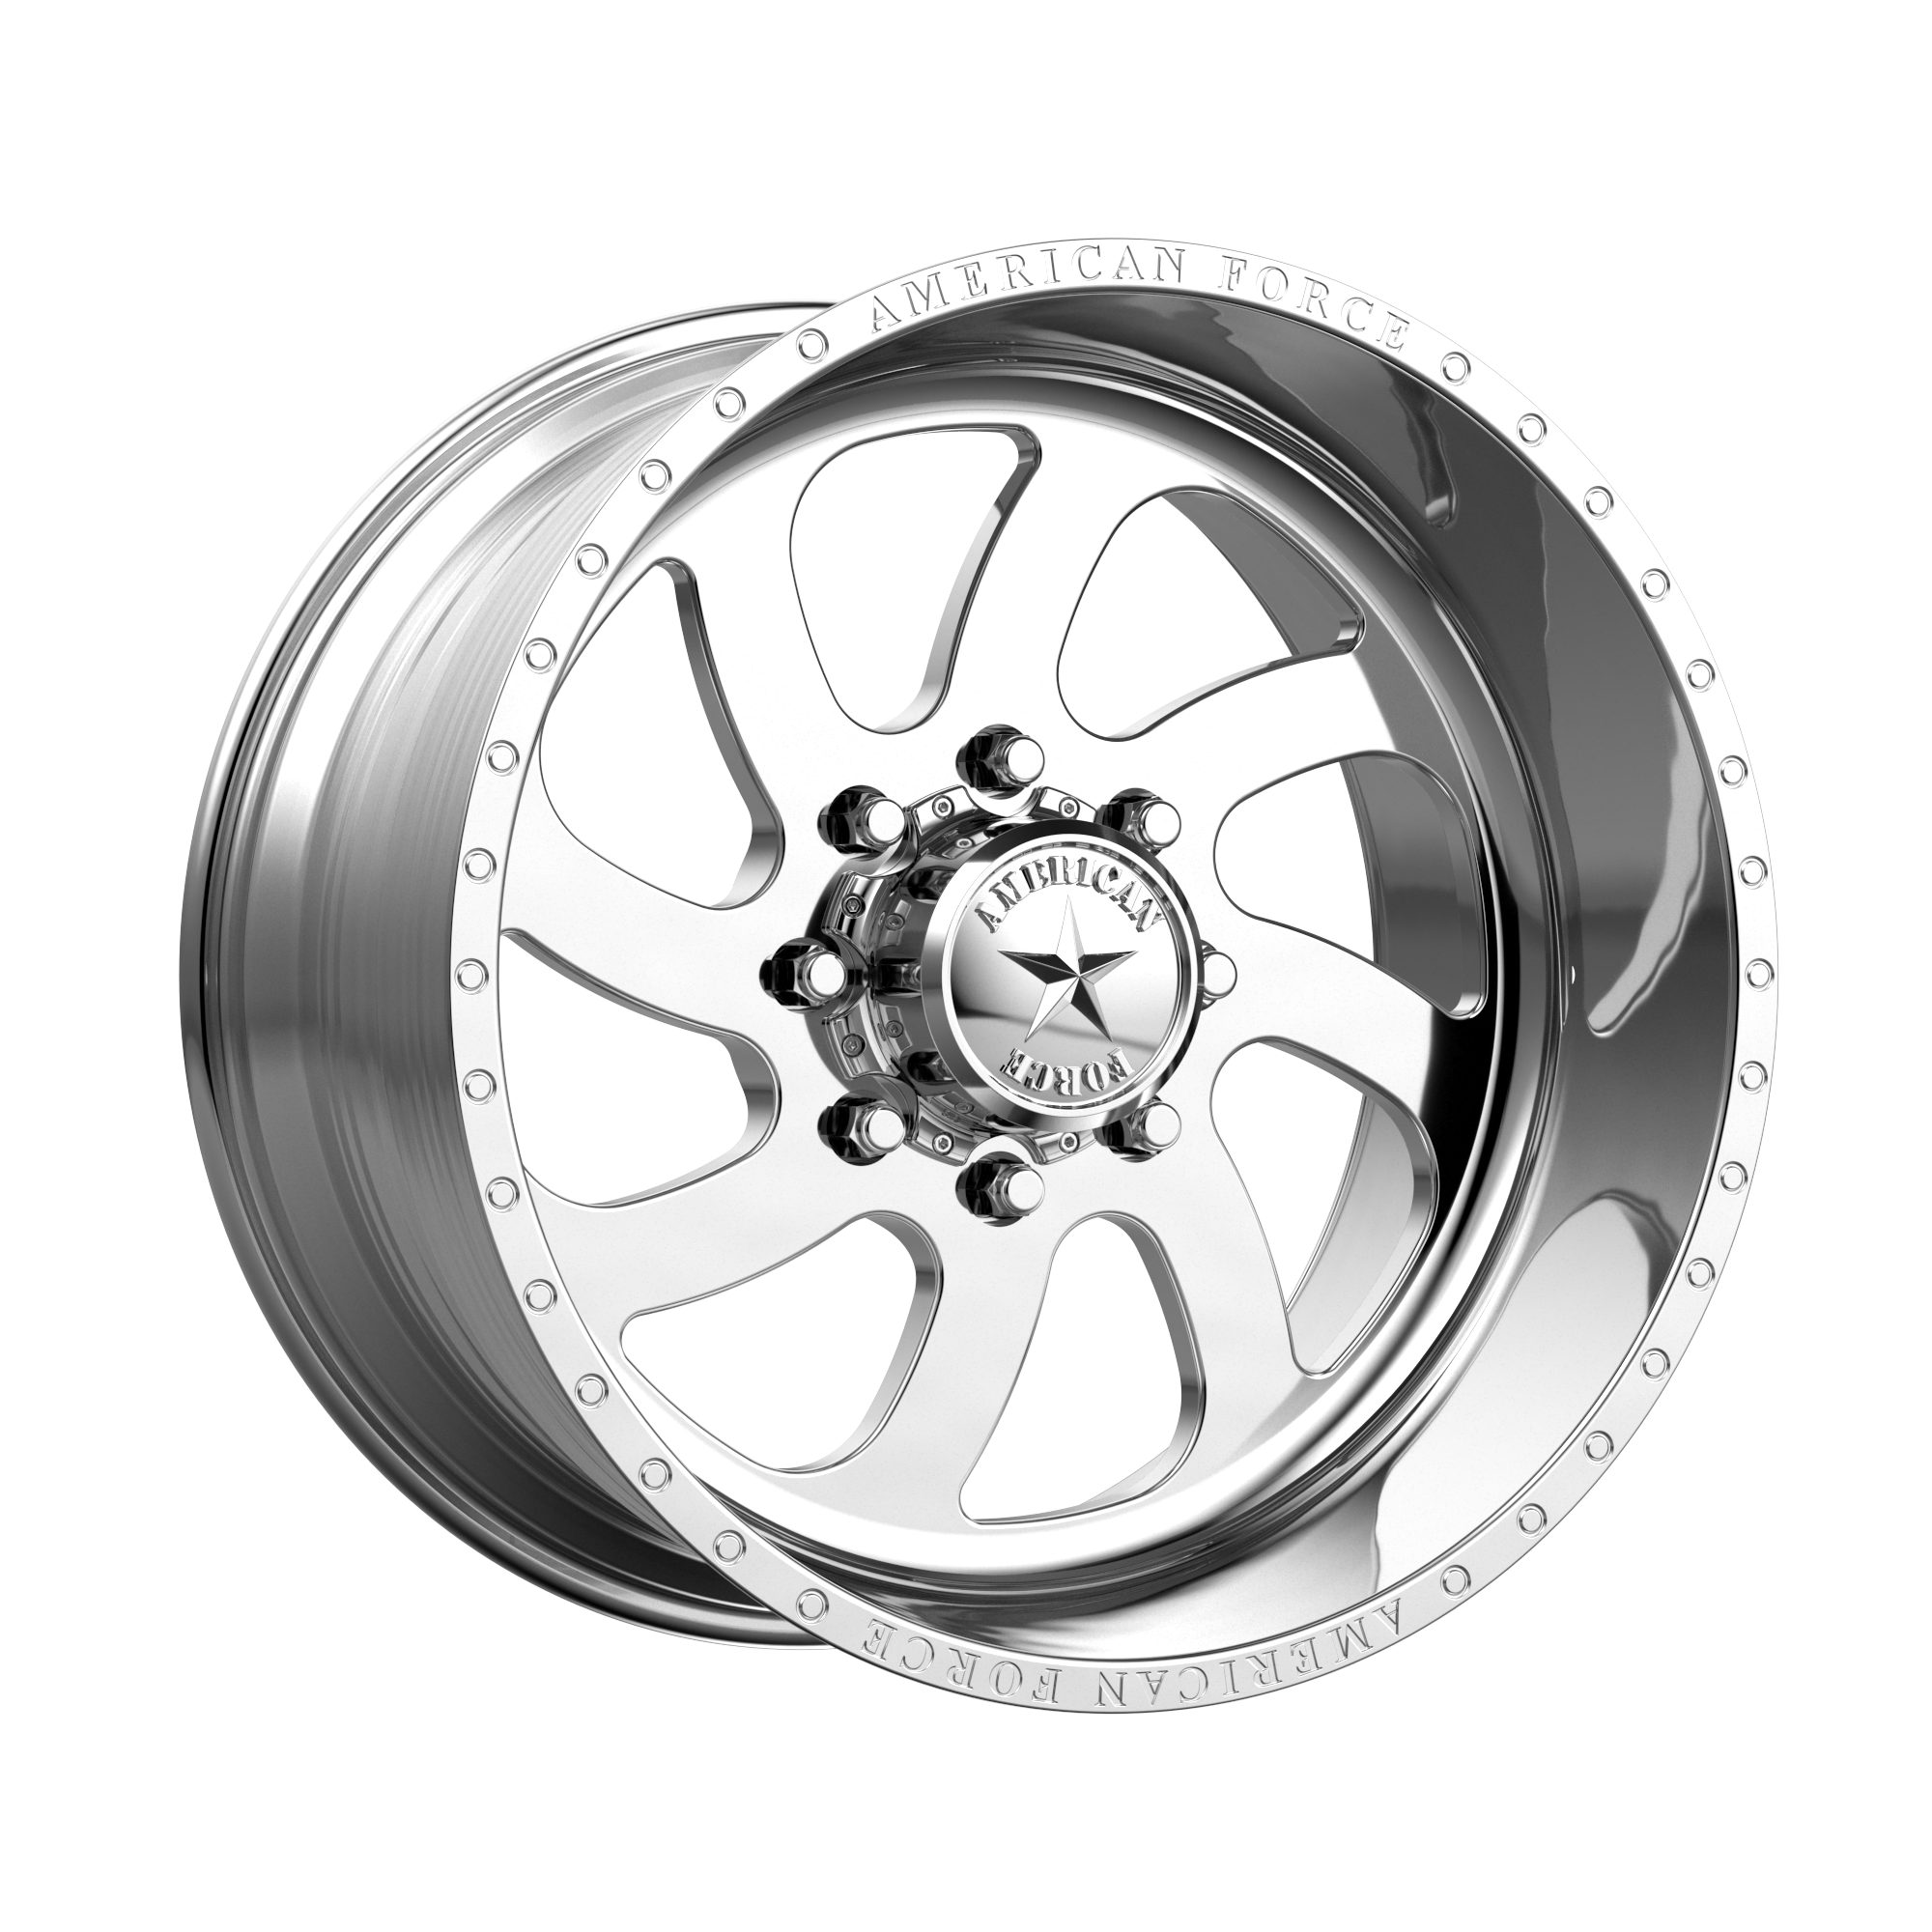 American Force AFW 76 BLADE SS 22x10 -18 5x127/5x5.0 Polished